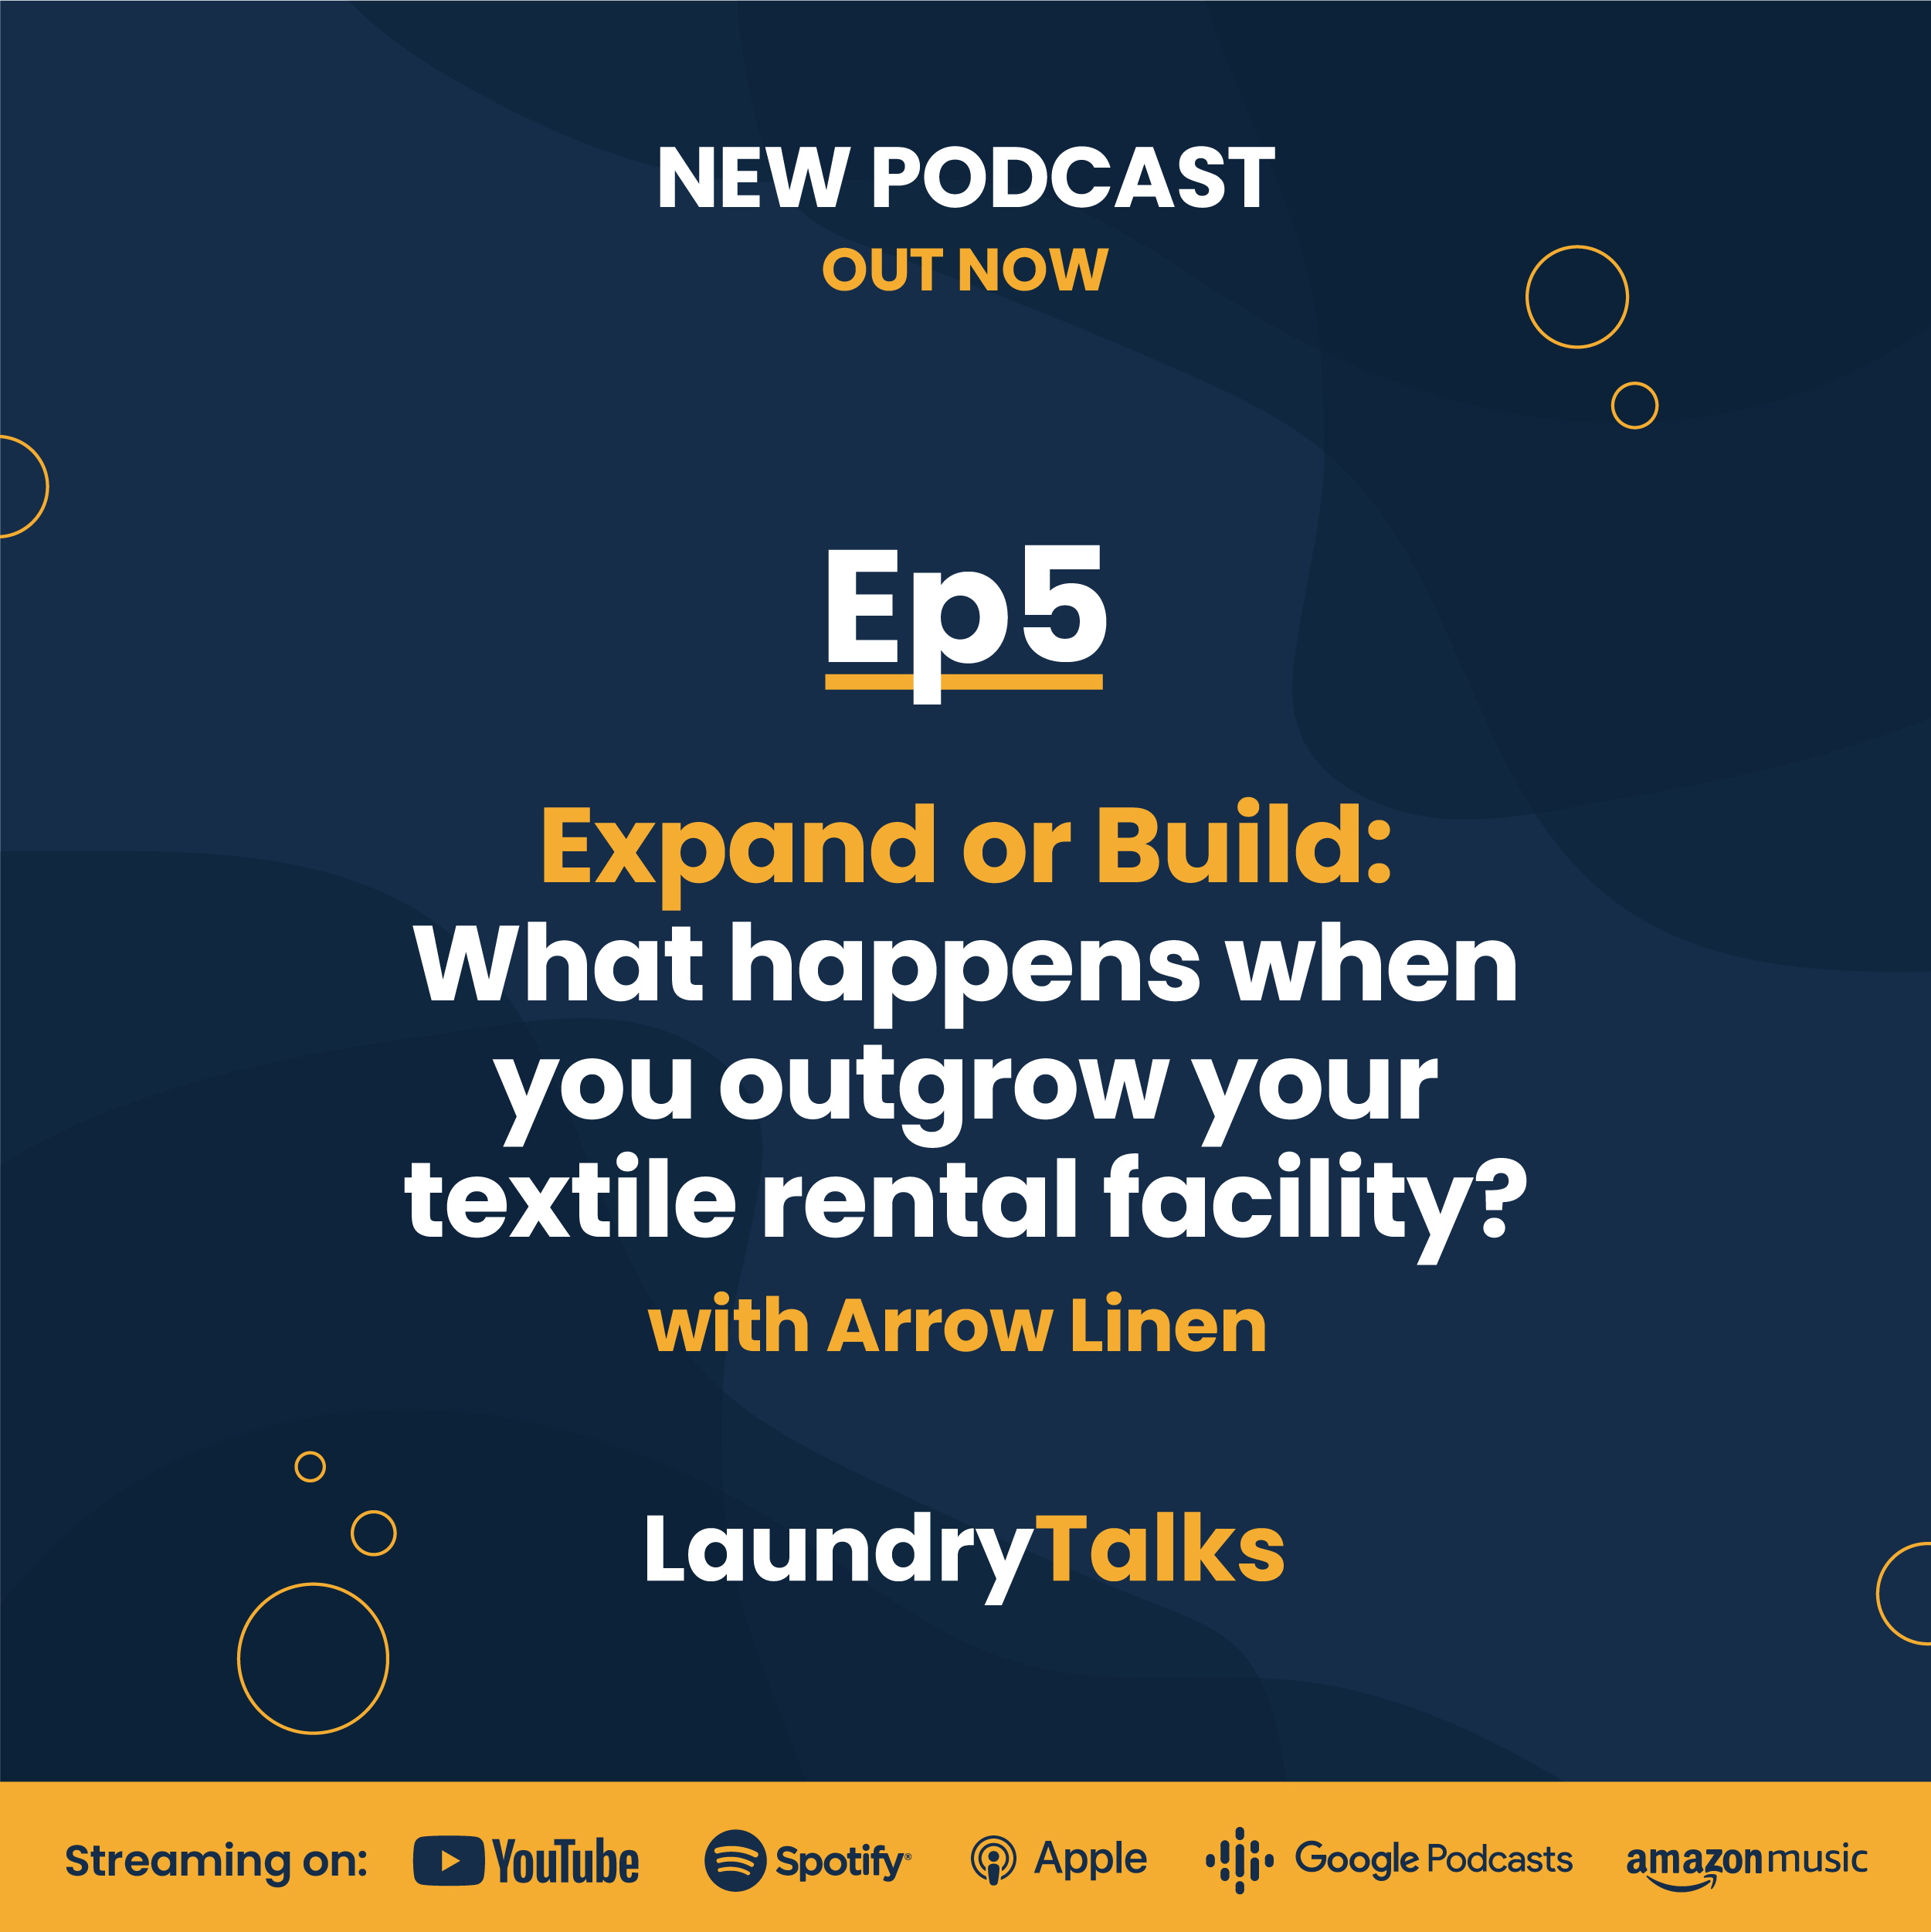 Expand or Build: What happens when you outgrow your textile rental facility? with Arrow Linen